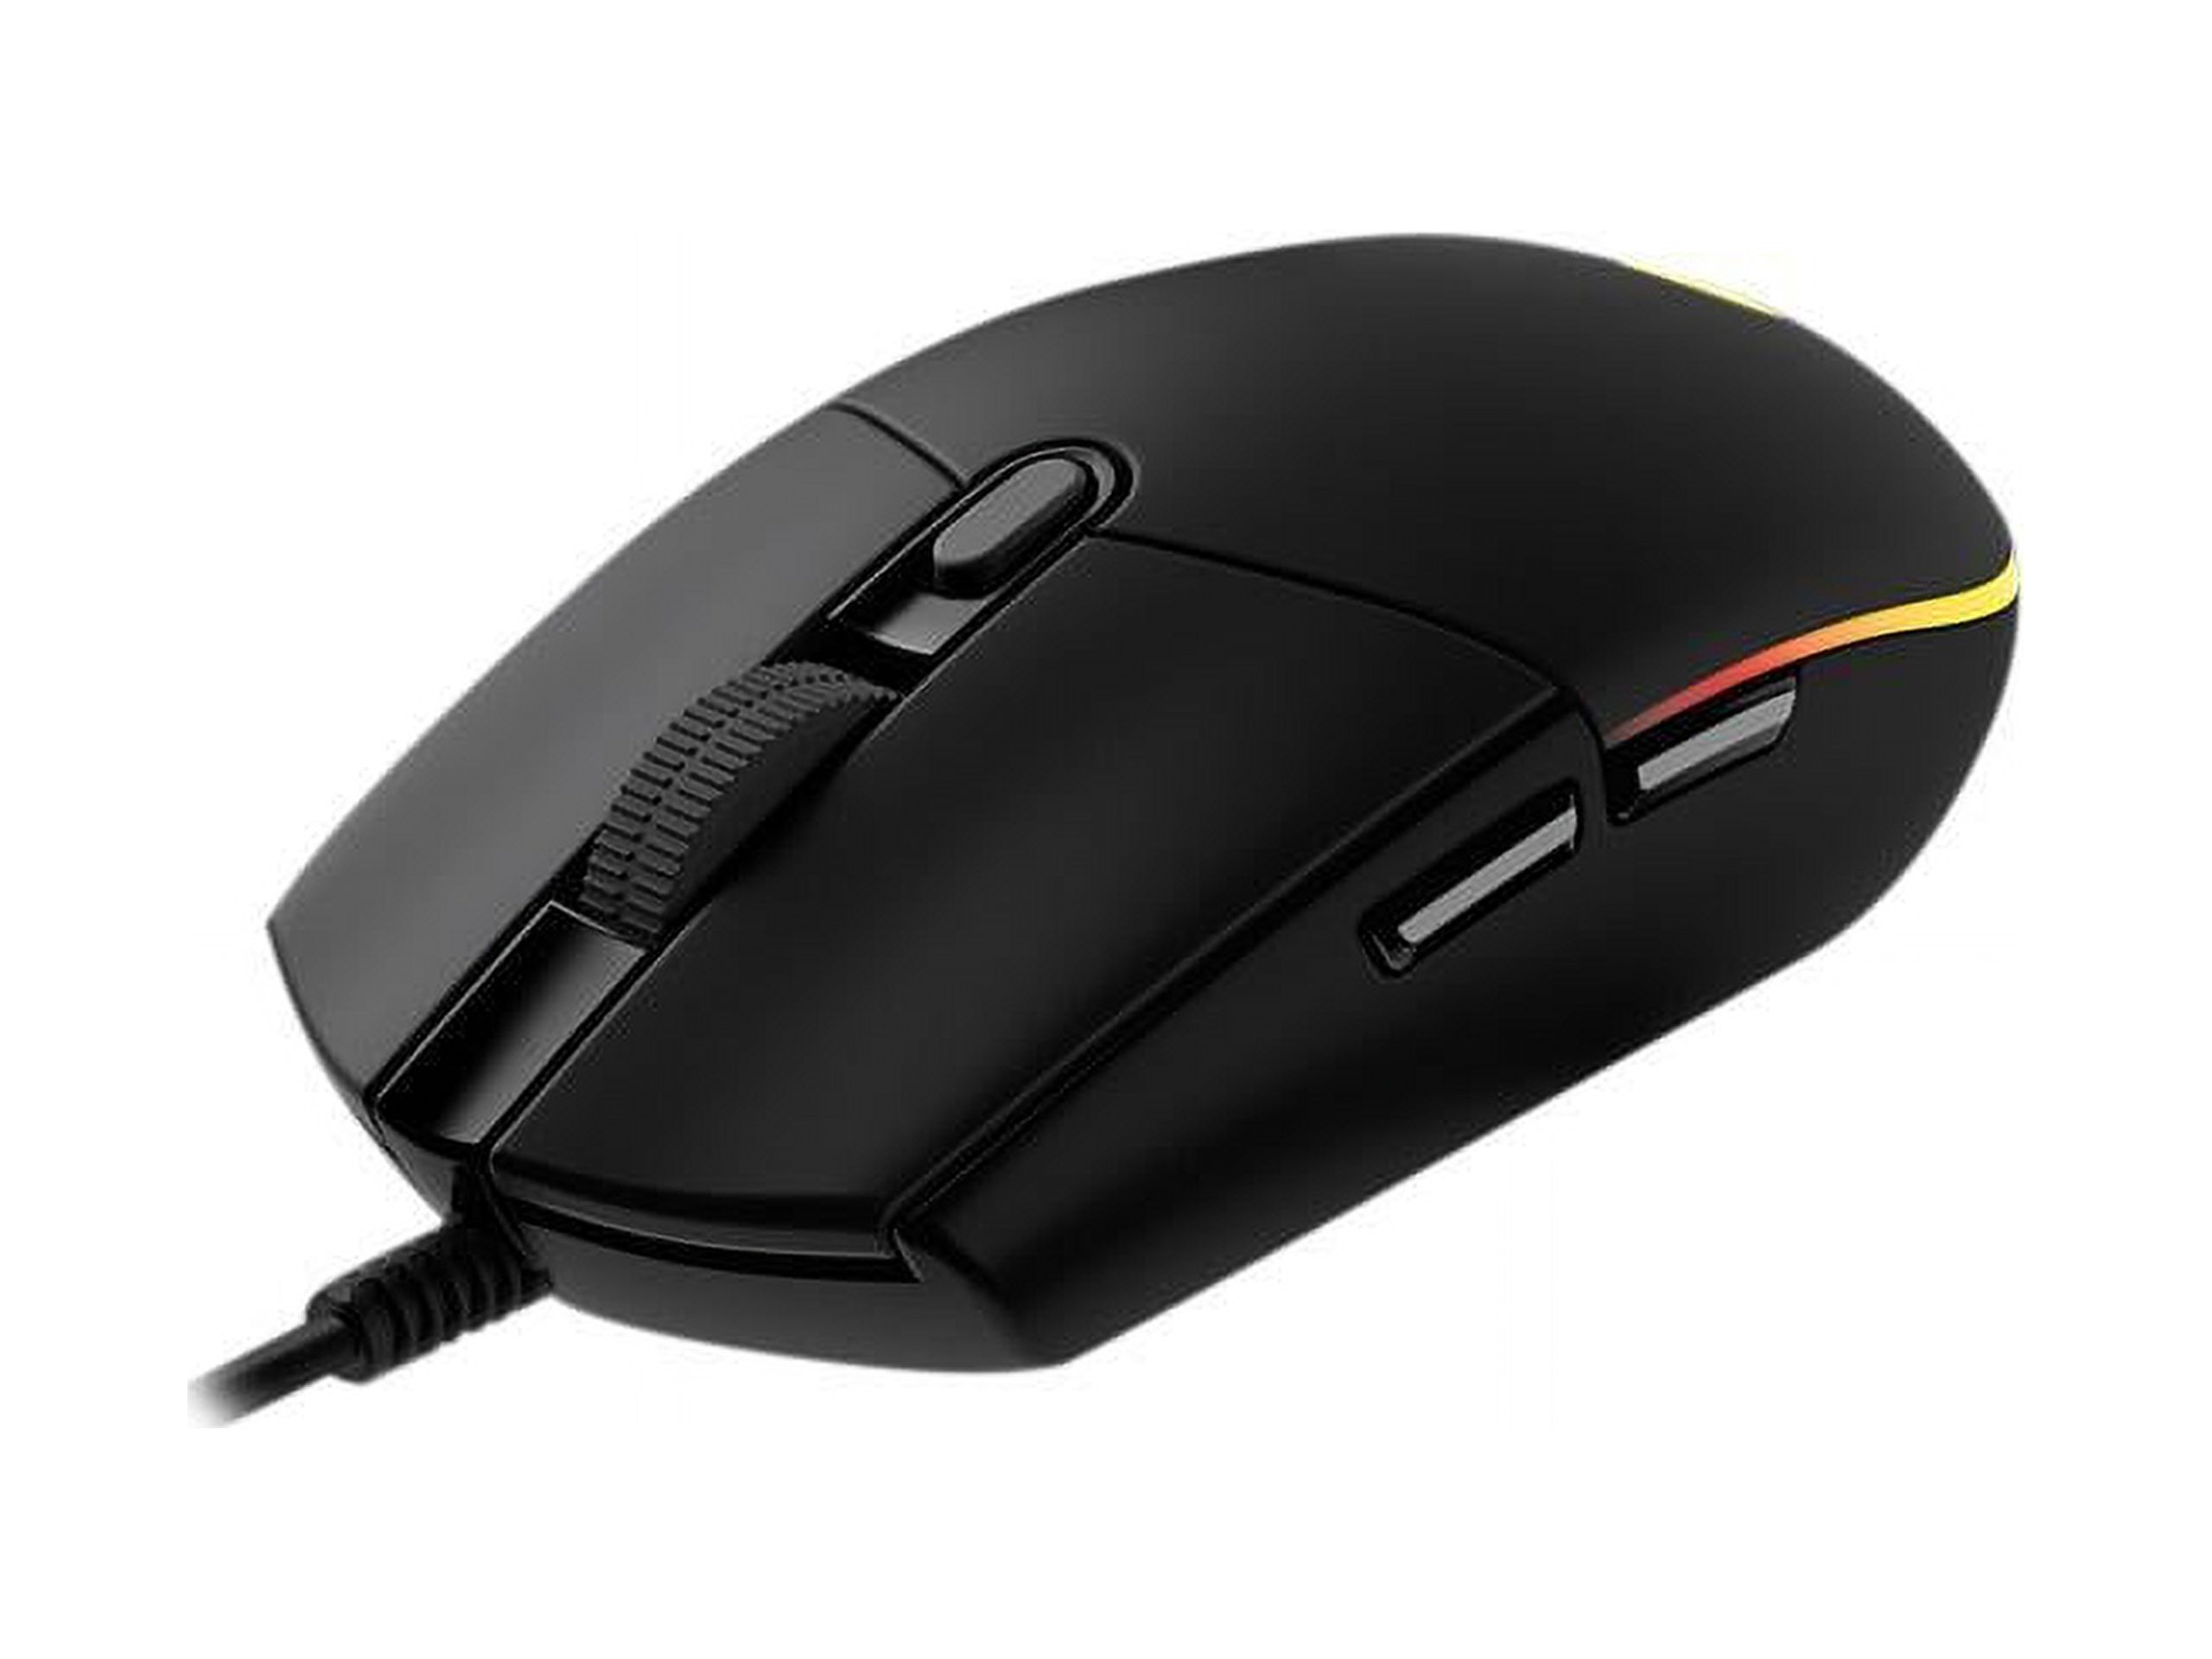 Logitech G203 Wired Gaming Mouse, 8,000 DPI, Rainbow Optical Effect LIGHTSYNC RGB, 6 Programmable Buttons, On-Board Memory, Screen Mapping, PC/Mac Computer and Laptop Compatible - Black - image 3 of 7